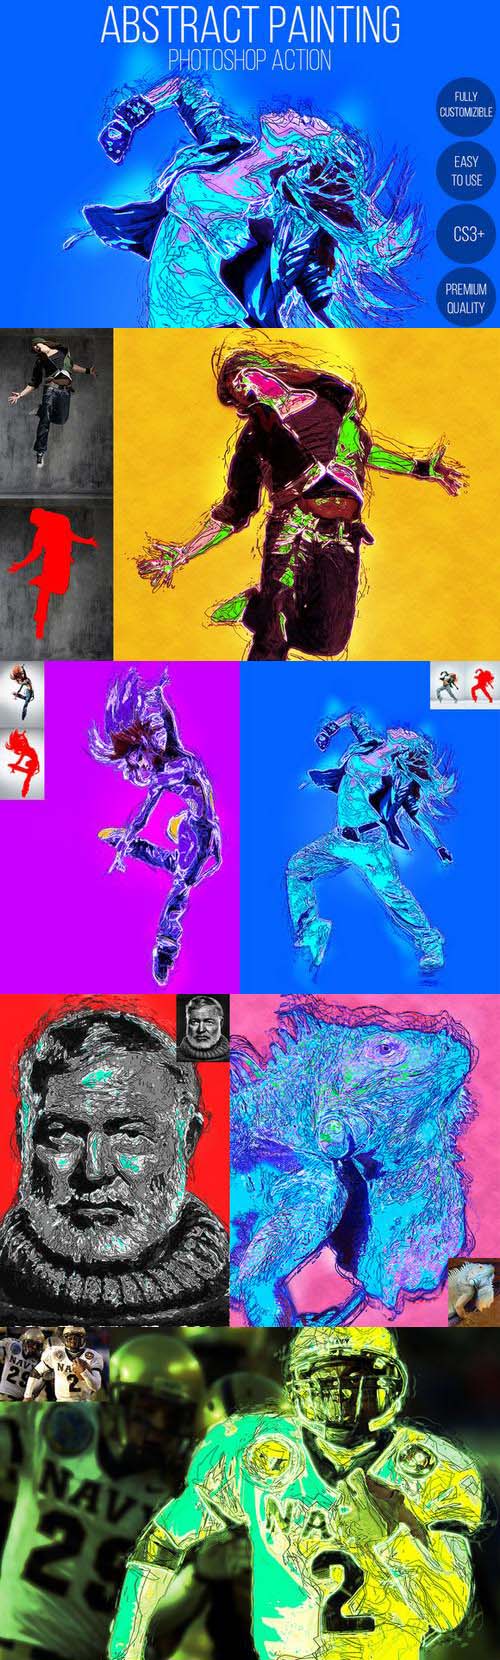 Abstract Painting Photoshop Action